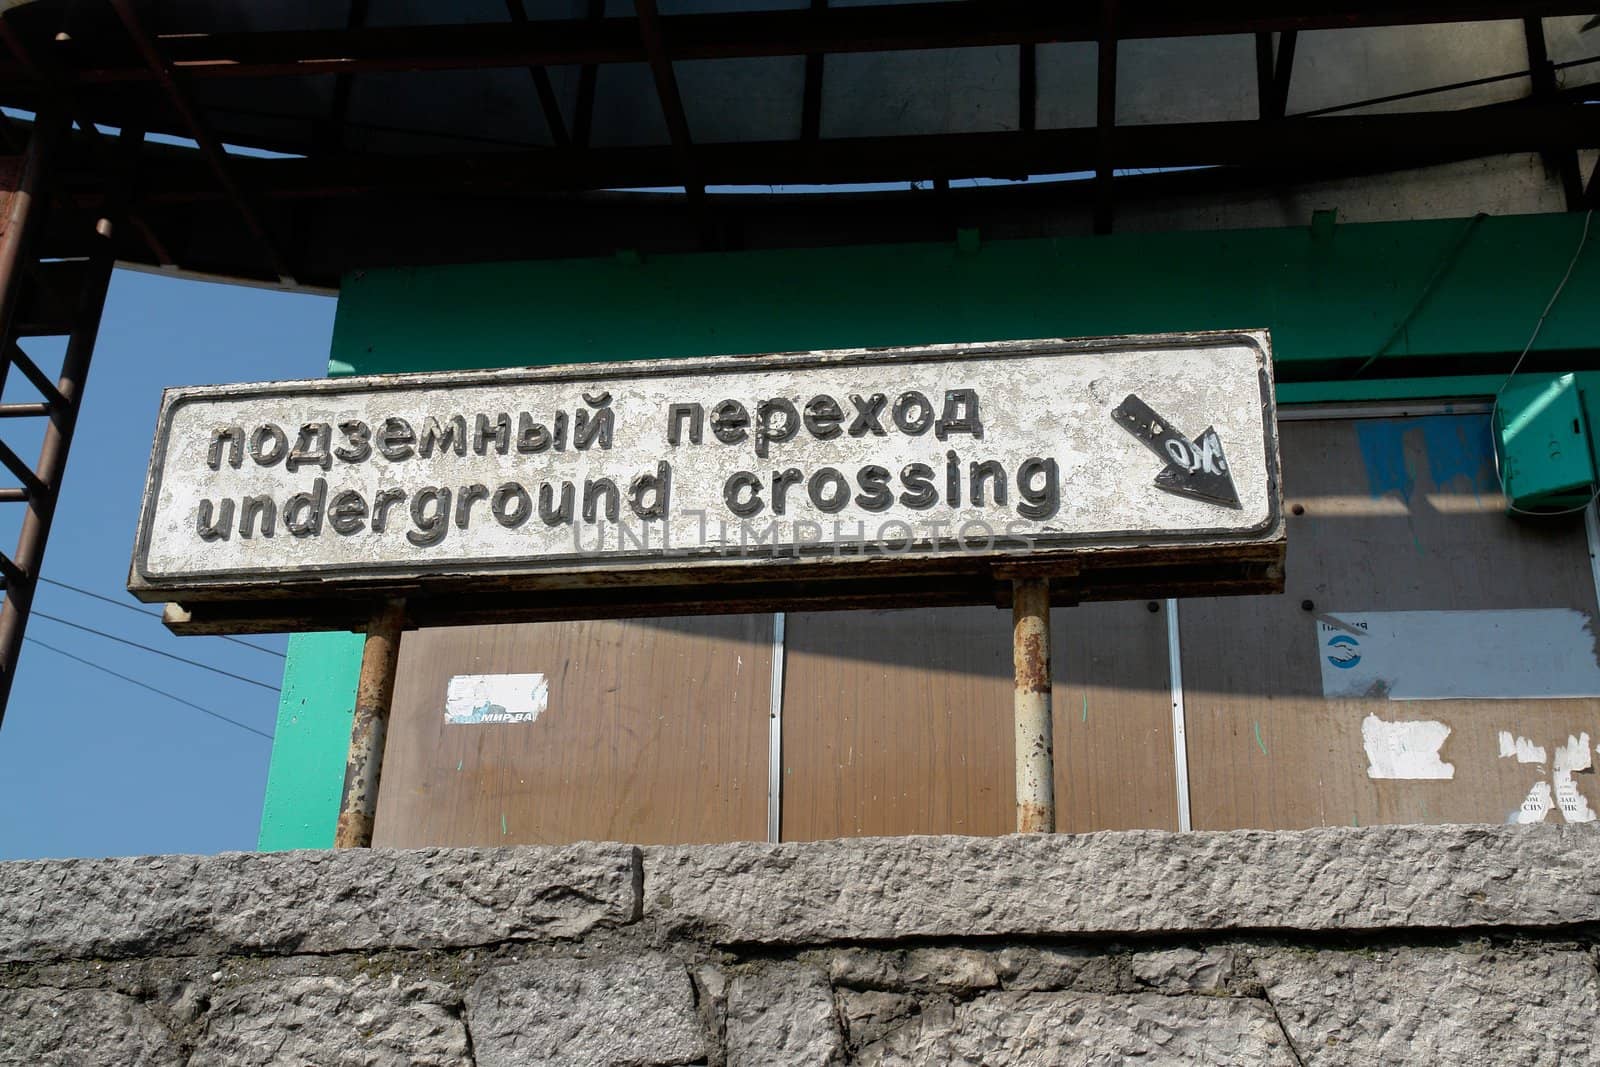 The old dusty index " Underground crossing "